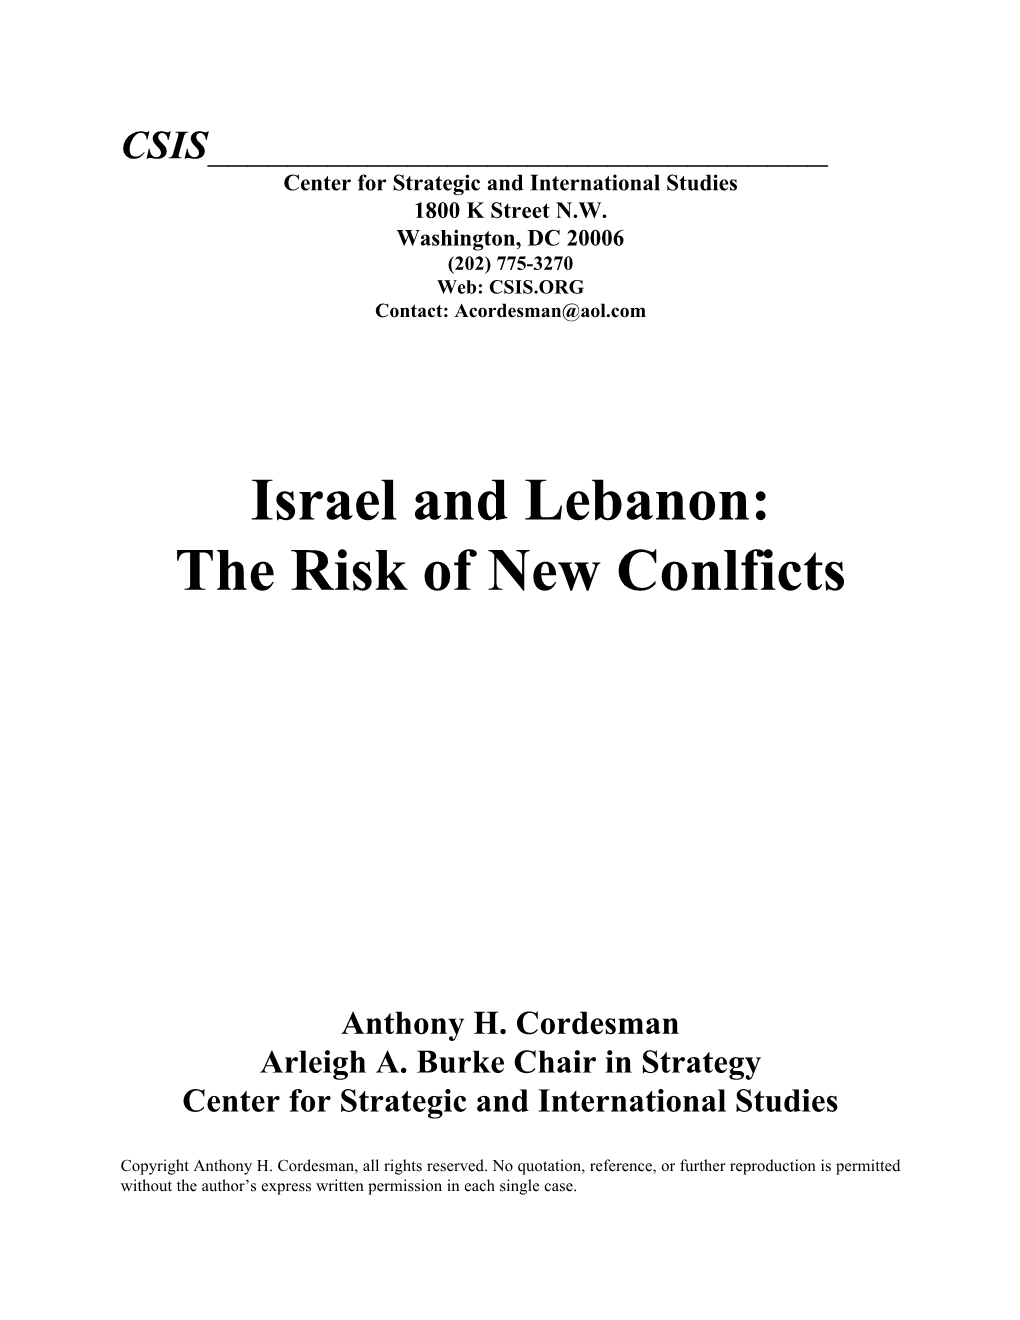 Israel and Lebanon: the Risk of New Conlficts